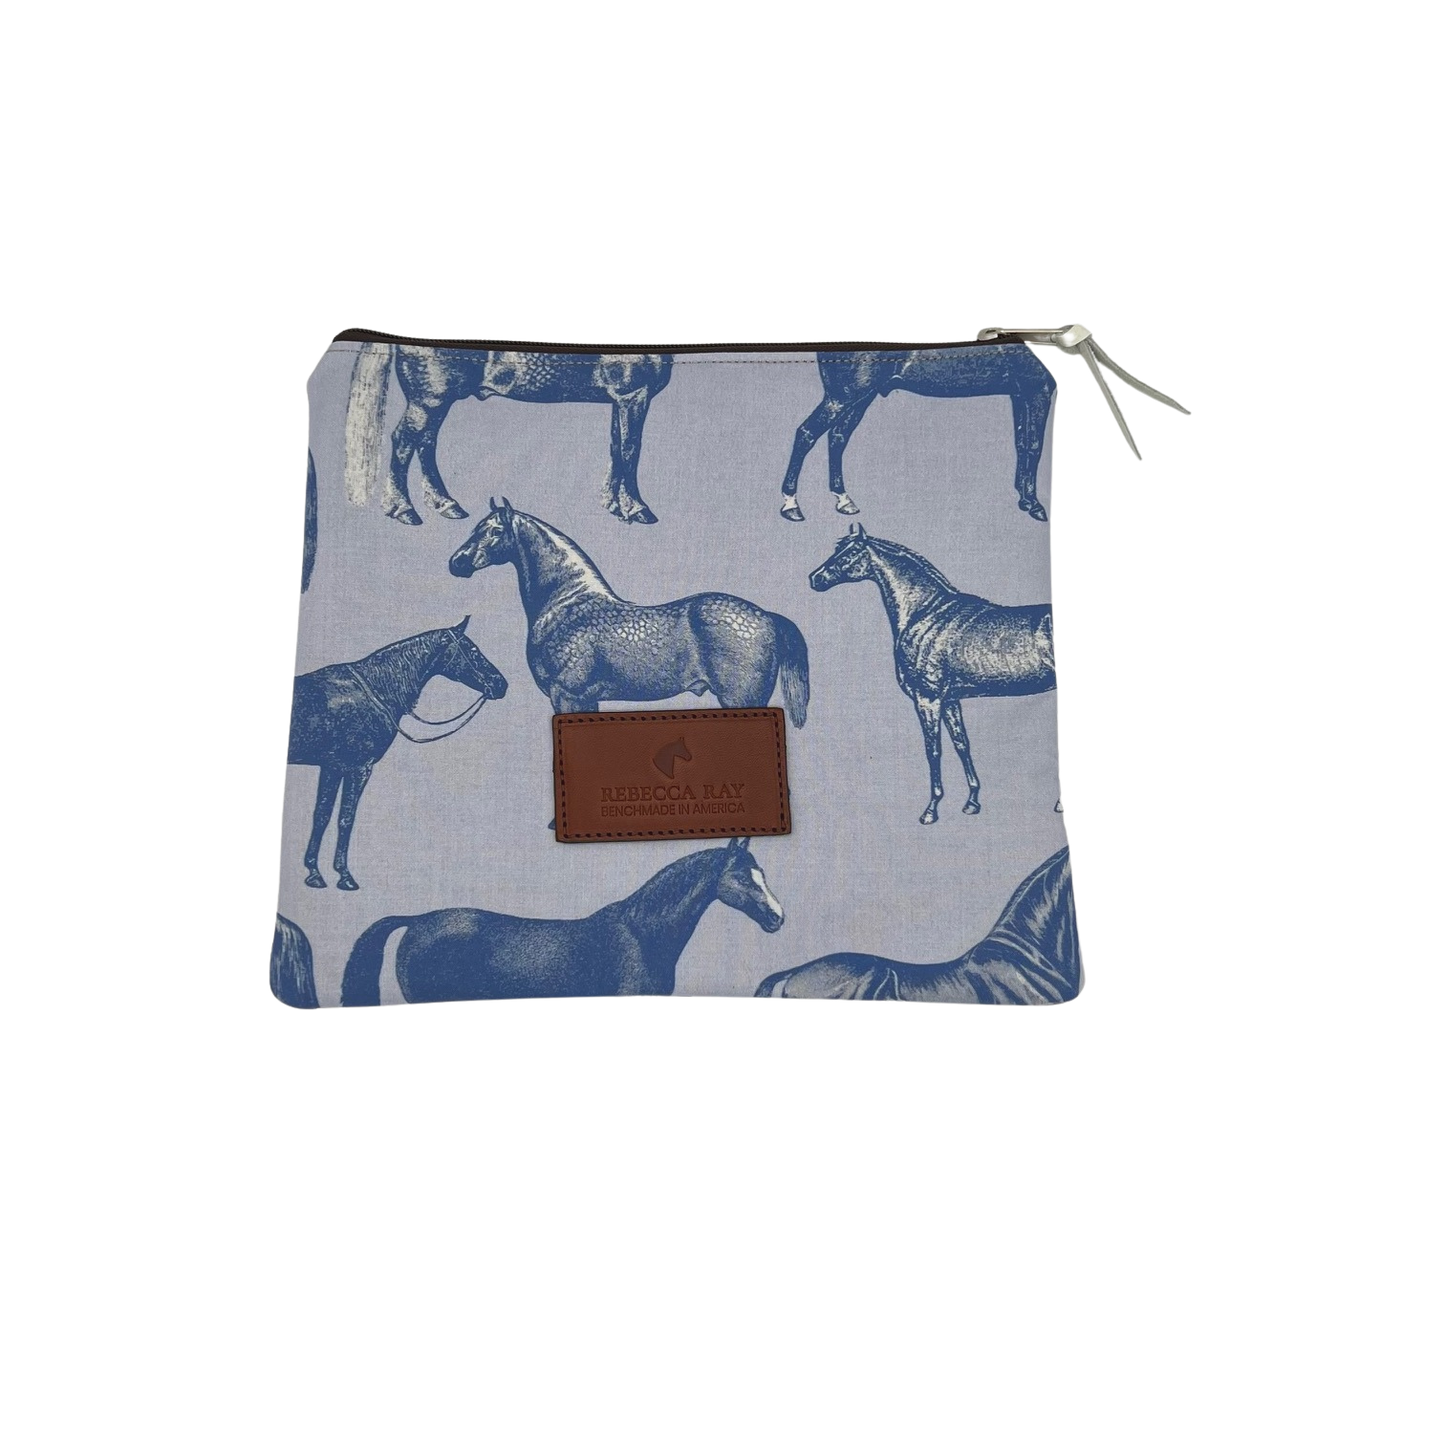 Stable Pouch Medium in Equus - 5 color options